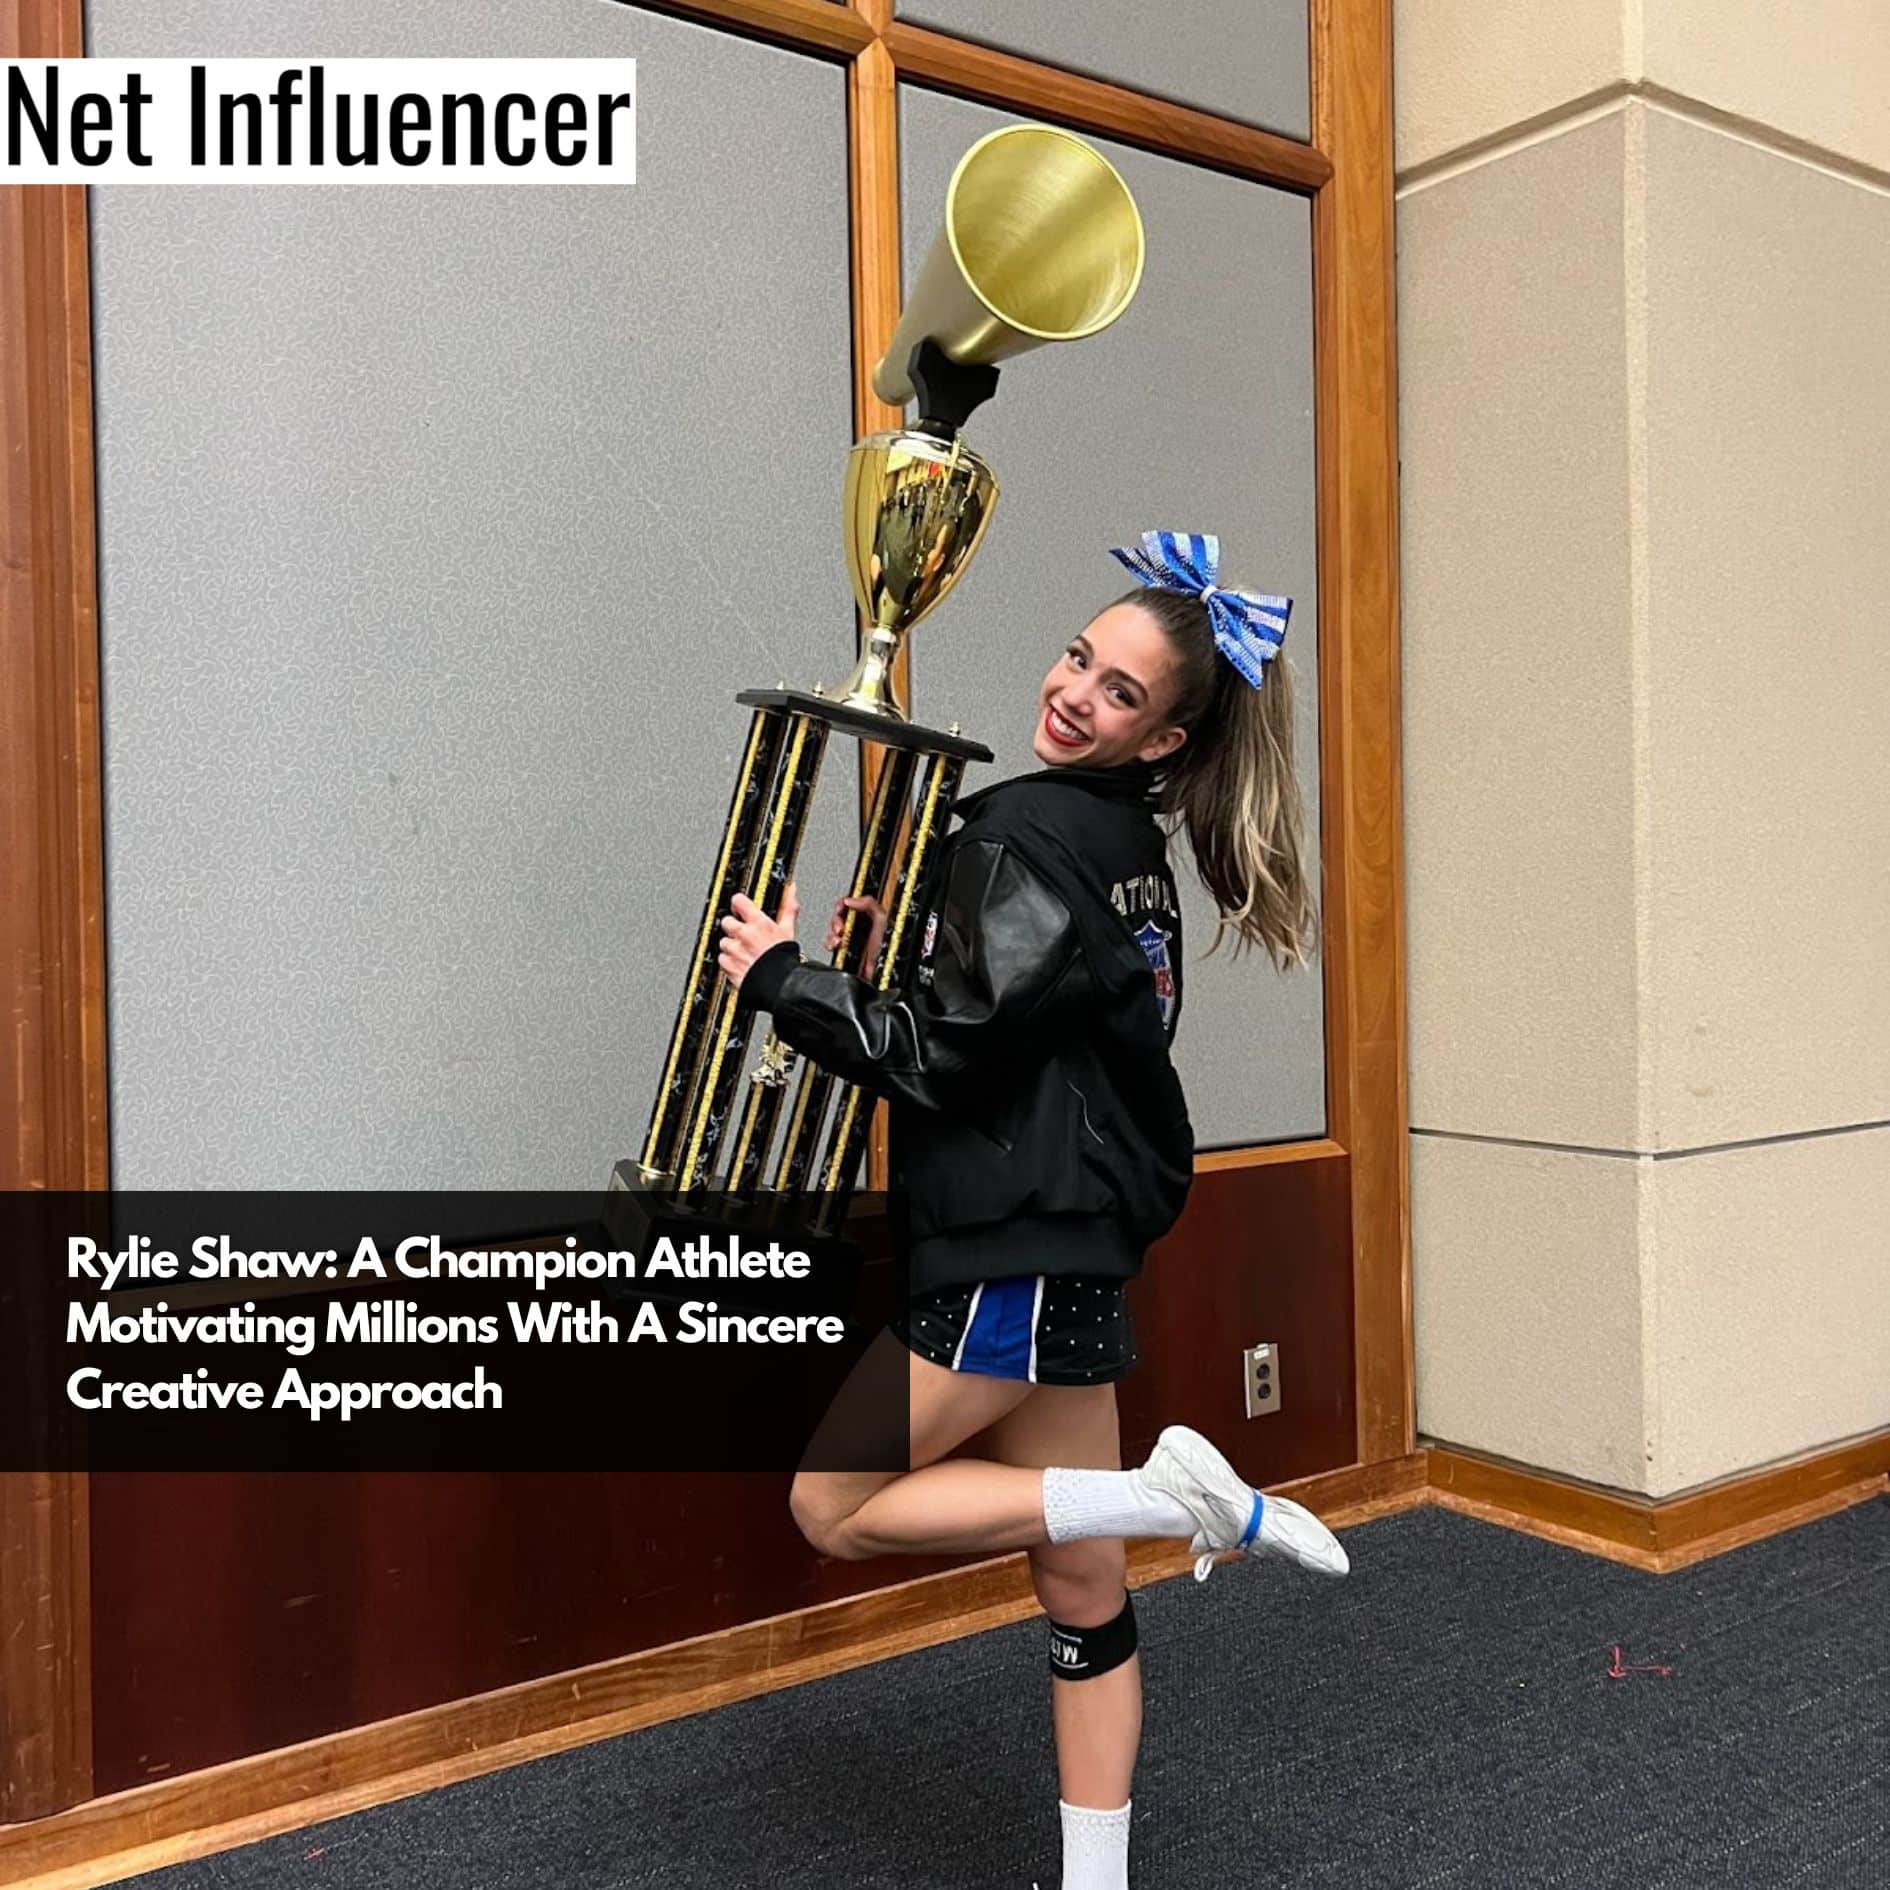 Rylie Shaw A Champion Athlete Motivating Millions With A Sincere Creative Approach